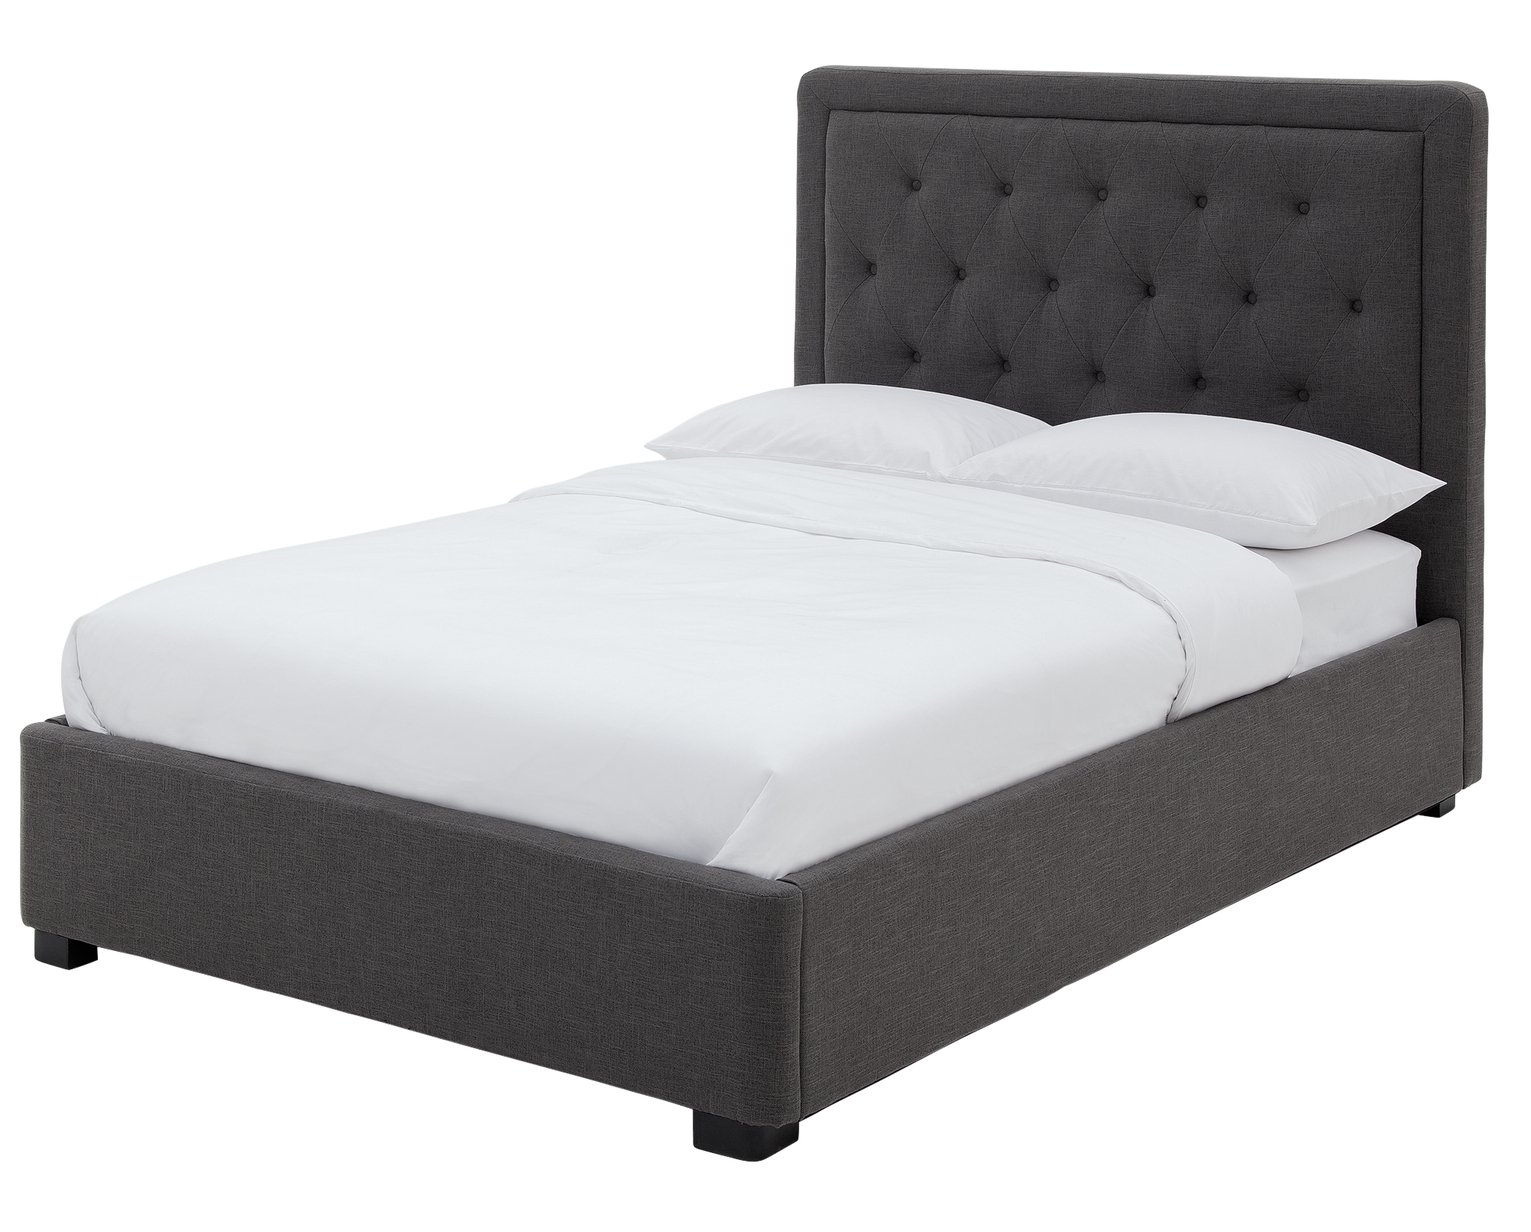 Argos Home Appleby Double Fabric Ottoman Bed - Charcoal